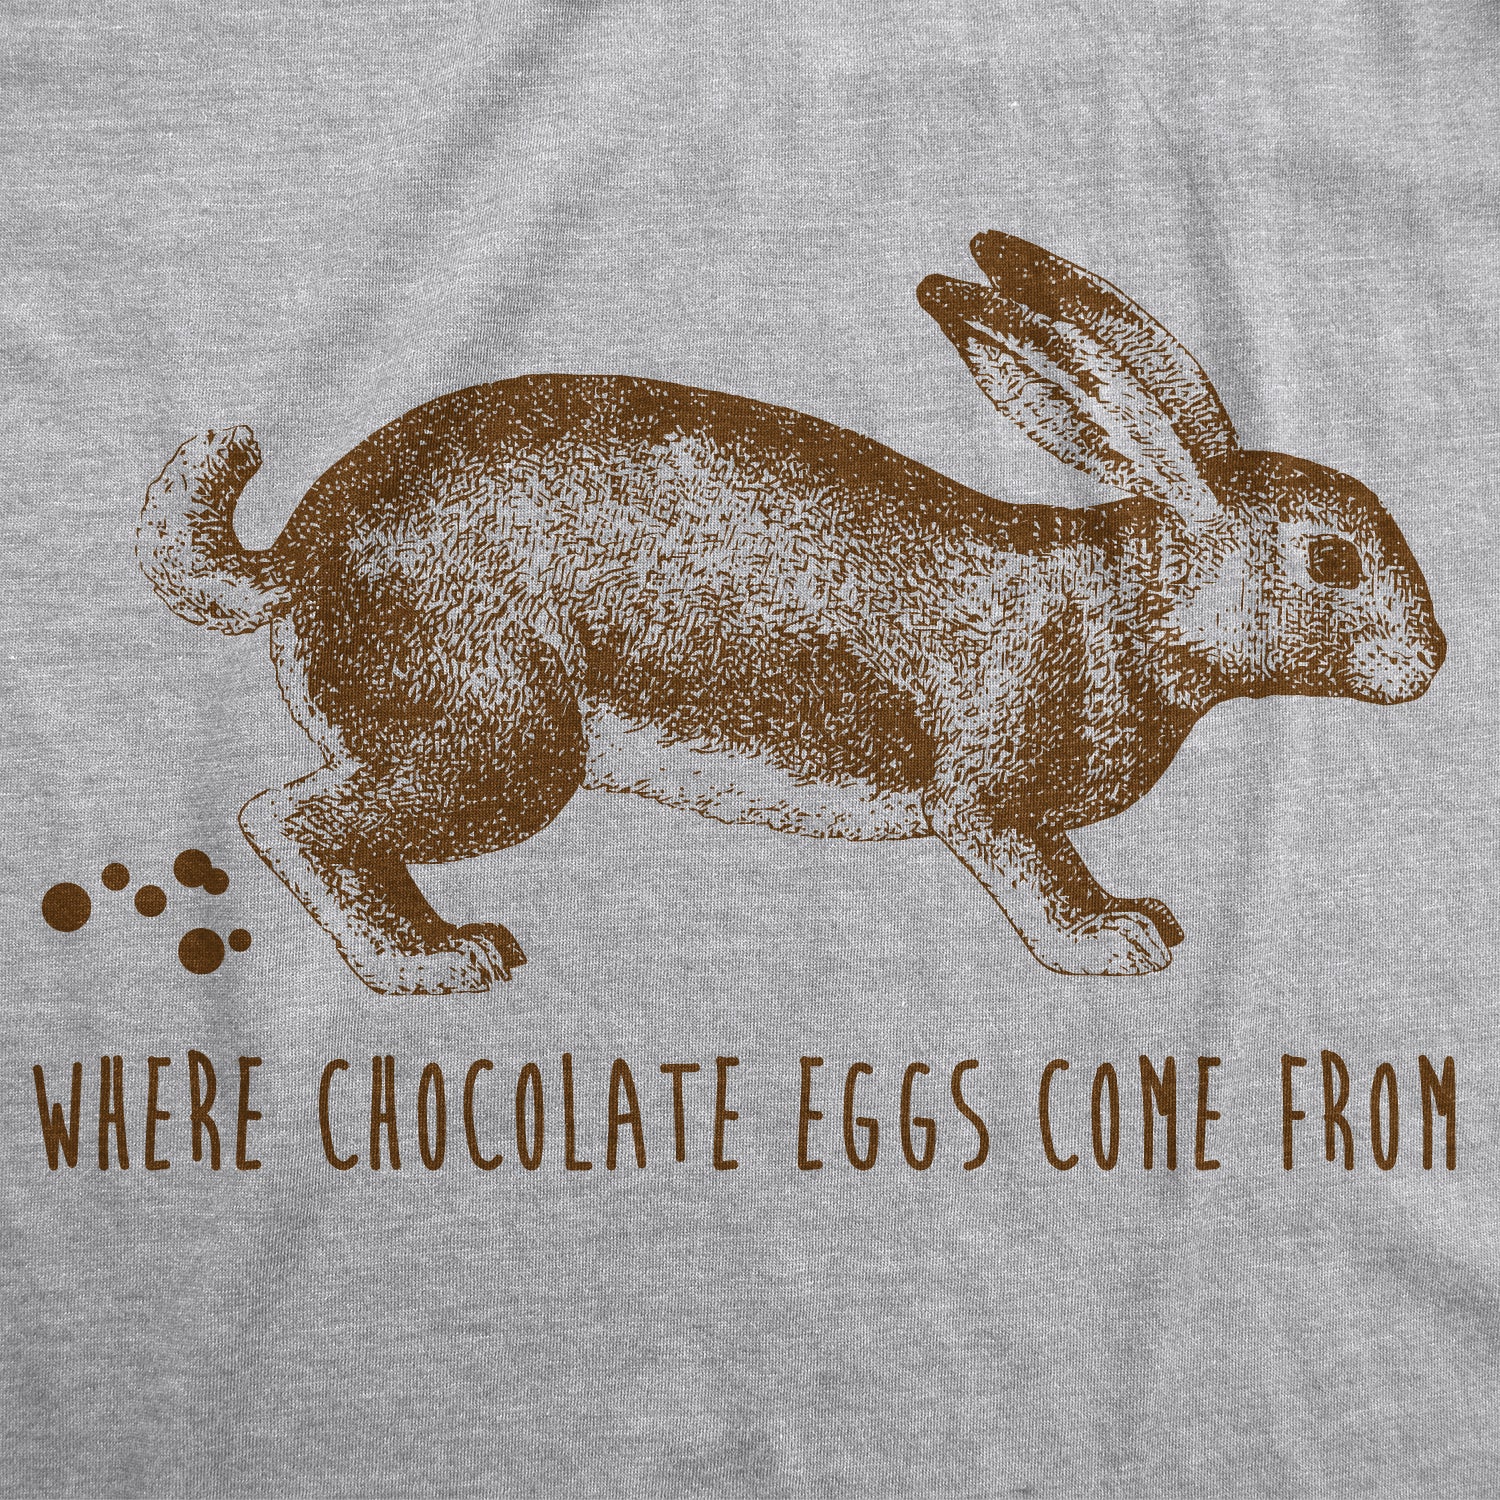 Funny Light Heather Grey - Chocolate Eggs Where Chocolate Eggs Come From Mens T Shirt Nerdy Easter Food Tee